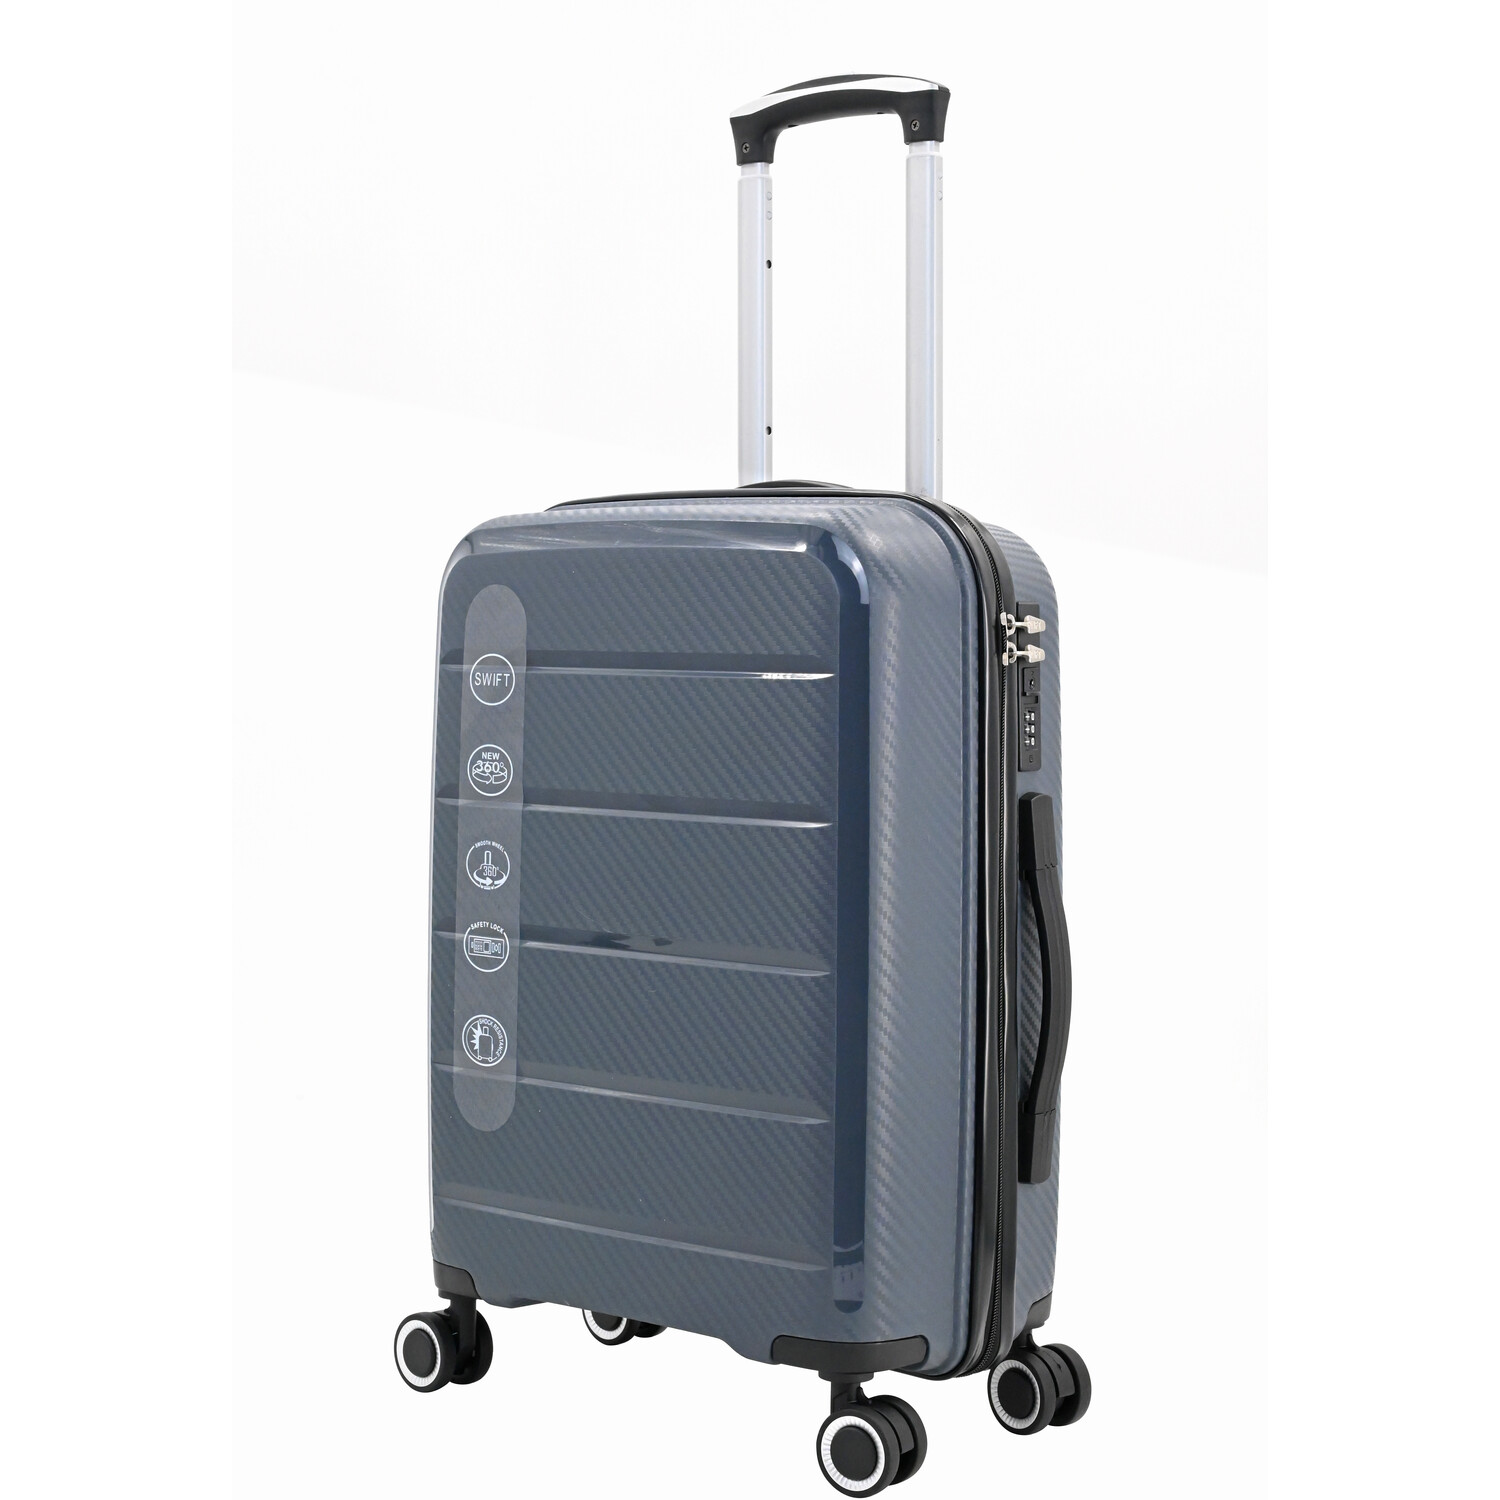 Swift Discovery Luggage Case - Grey / Cabin Case Image 2